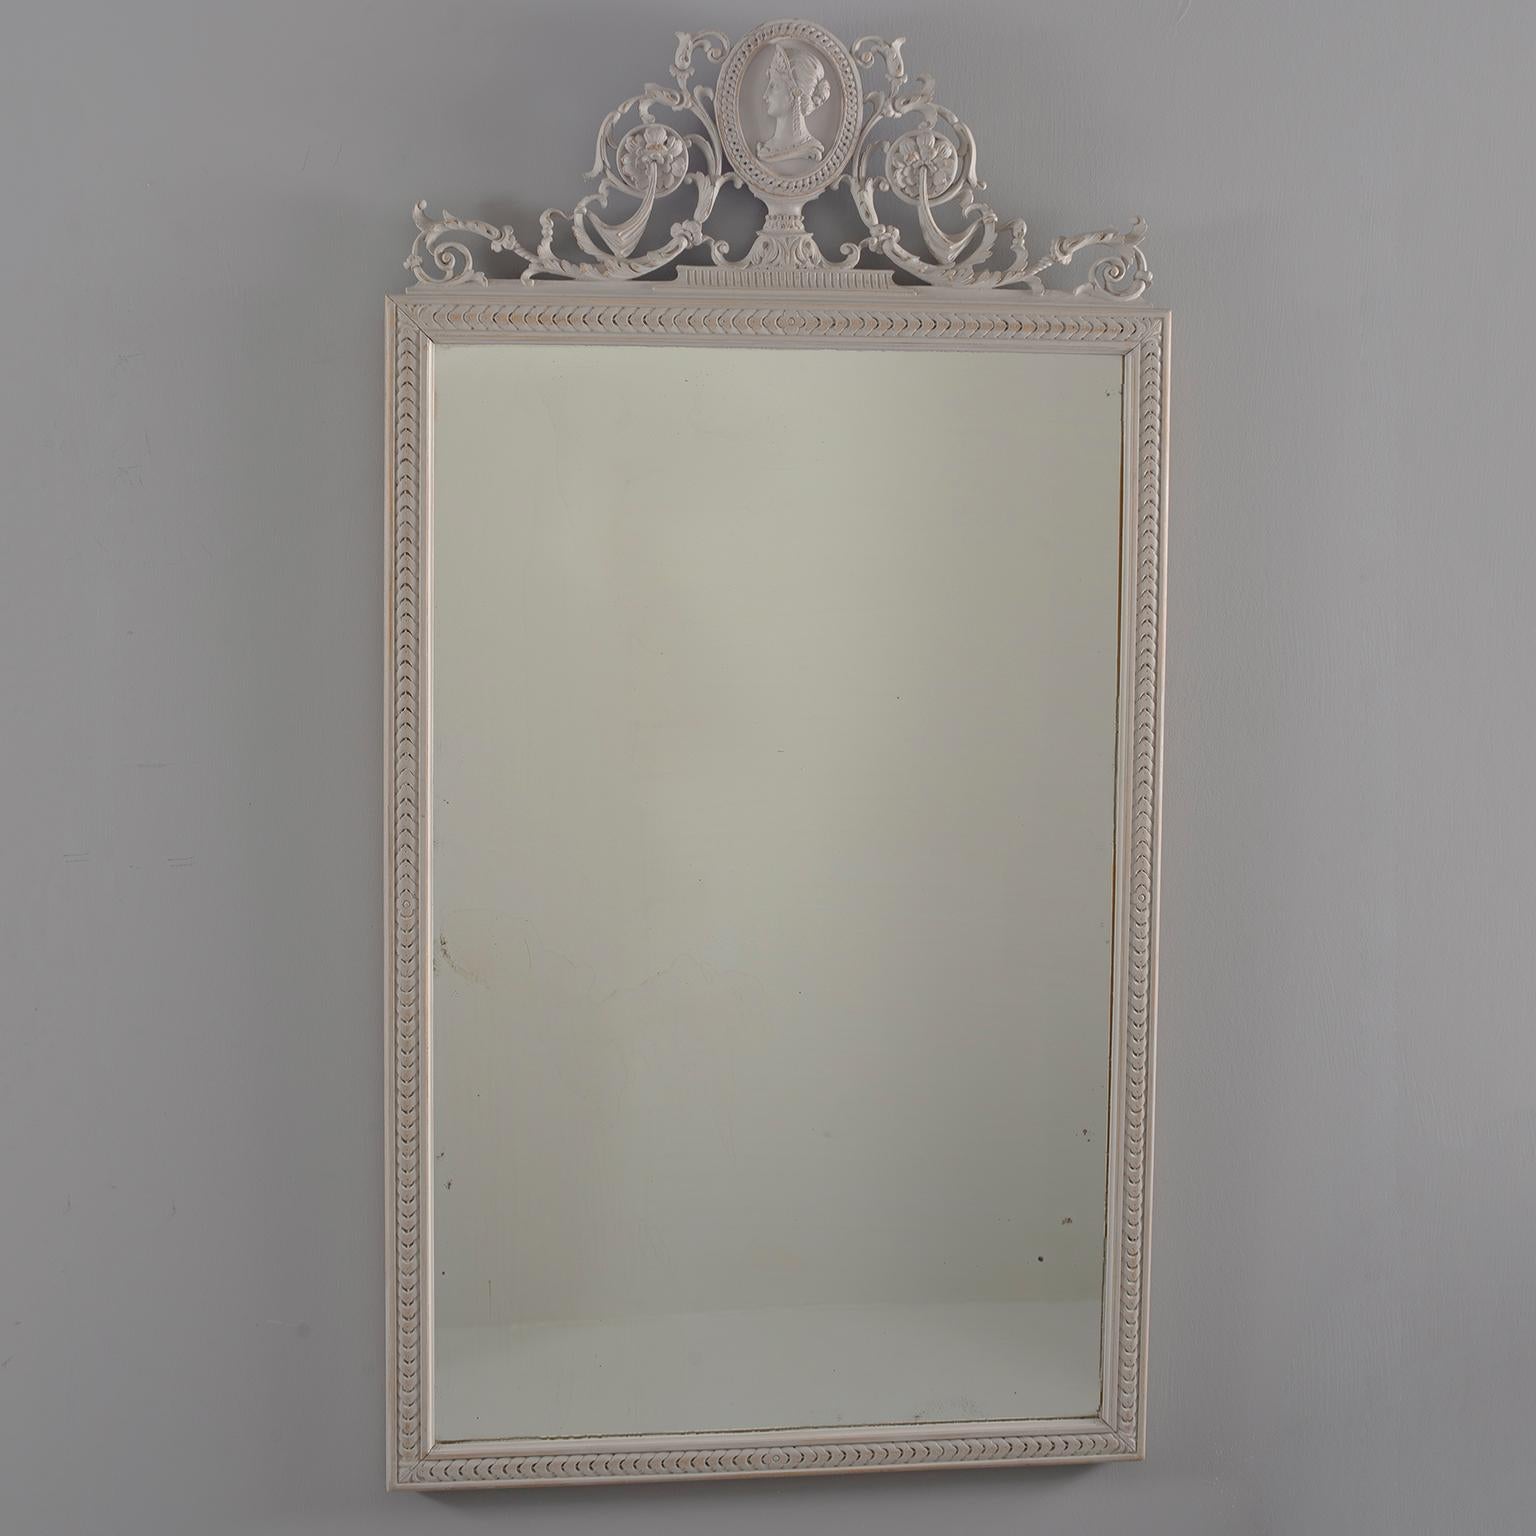 Pair of Directoire style wood framed mirrors with antique white painted finish feature beveled edges and elaborate crests topped with a carved bust. Sold and priced as a pair, circa 1890.  Actual Mirror Size:  36.75” h x 22.75” w